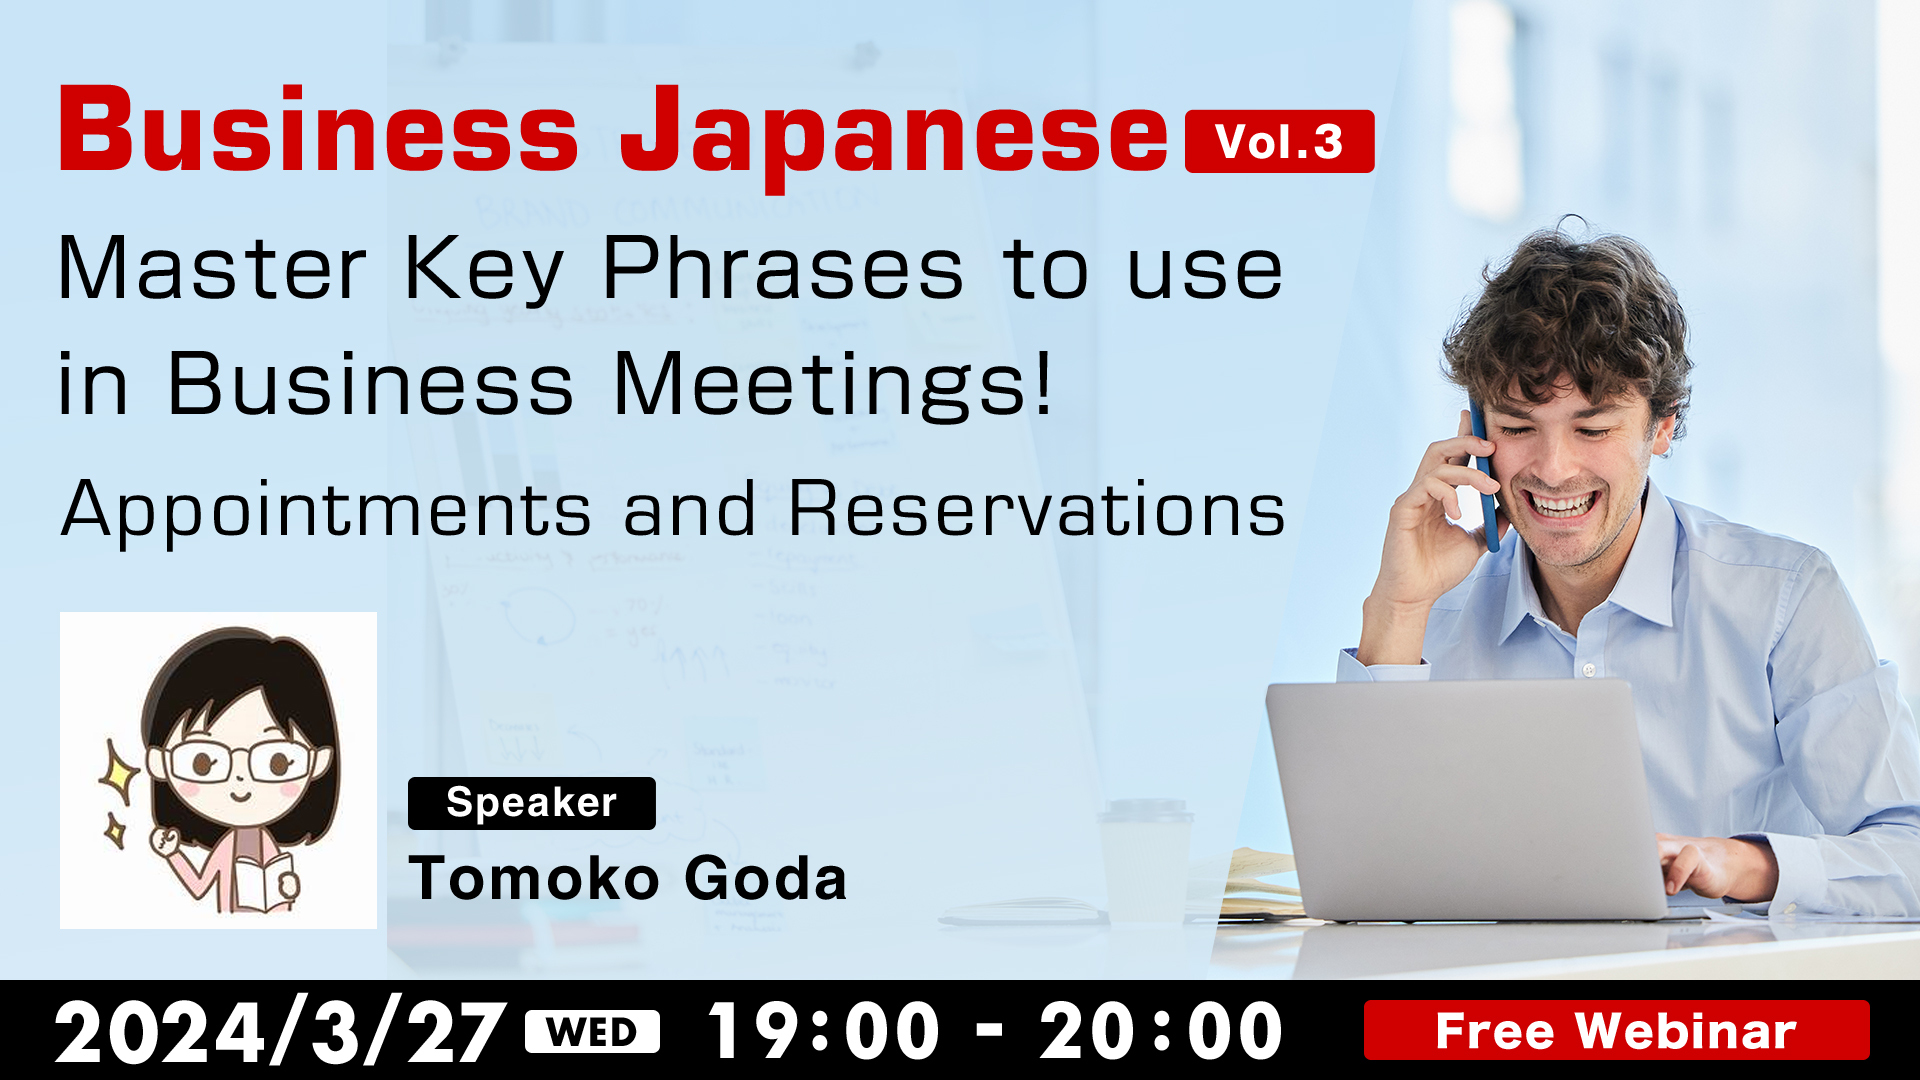 Business Japanese Seminar Vol3: Master Key Phrases to use in Business Meetings!